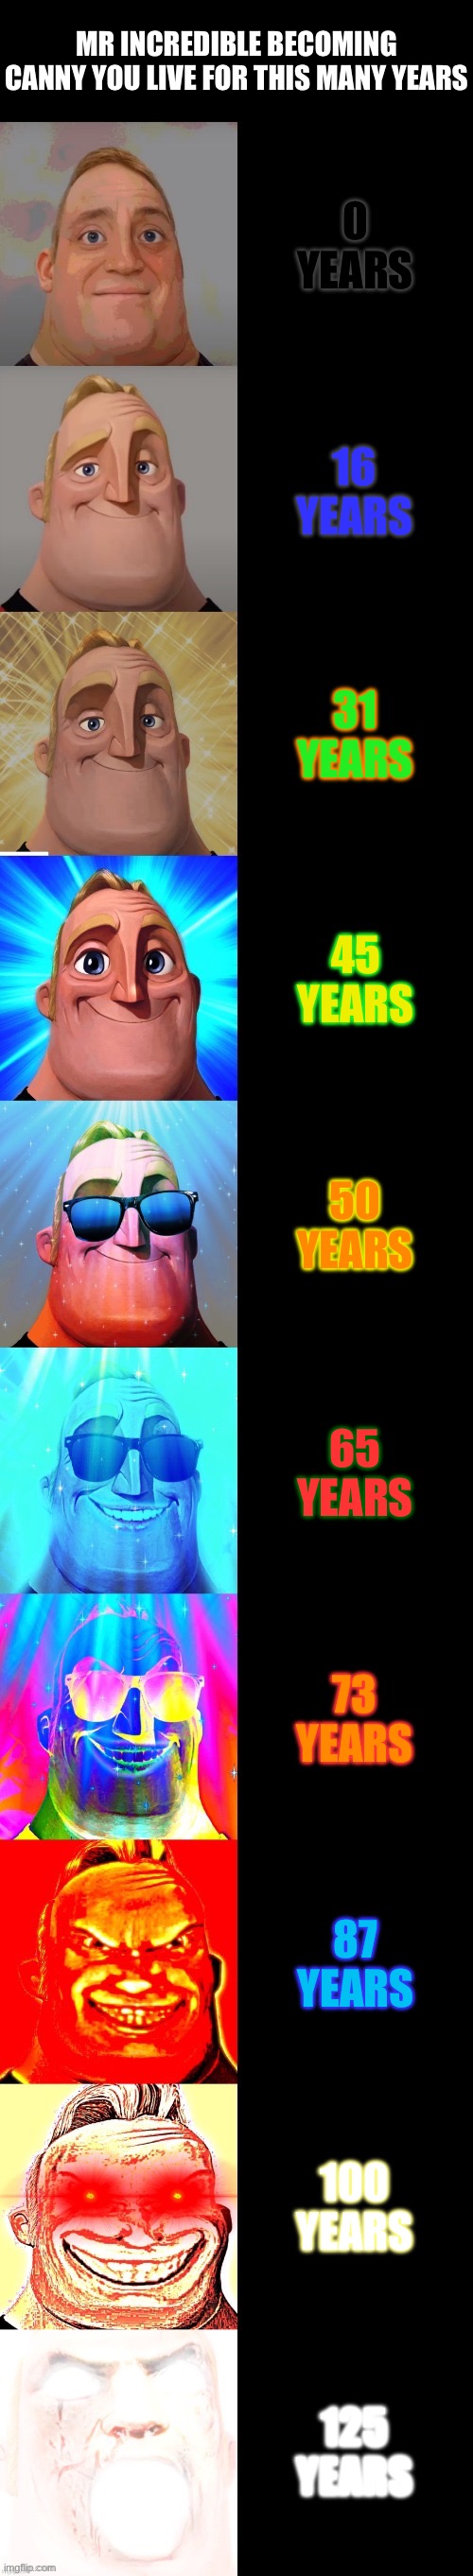 Mr Incredible Becoming Canny You Live For | MR INCREDIBLE BECOMING CANNY YOU LIVE FOR THIS MANY YEARS; 0 YEARS; 16 YEARS; 31 YEARS; 45 YEARS; 50 YEARS; 65 YEARS; 73 YEARS; 87 YEARS; 100 YEARS; 125 YEARS | image tagged in mr incredible becoming canny | made w/ Imgflip meme maker